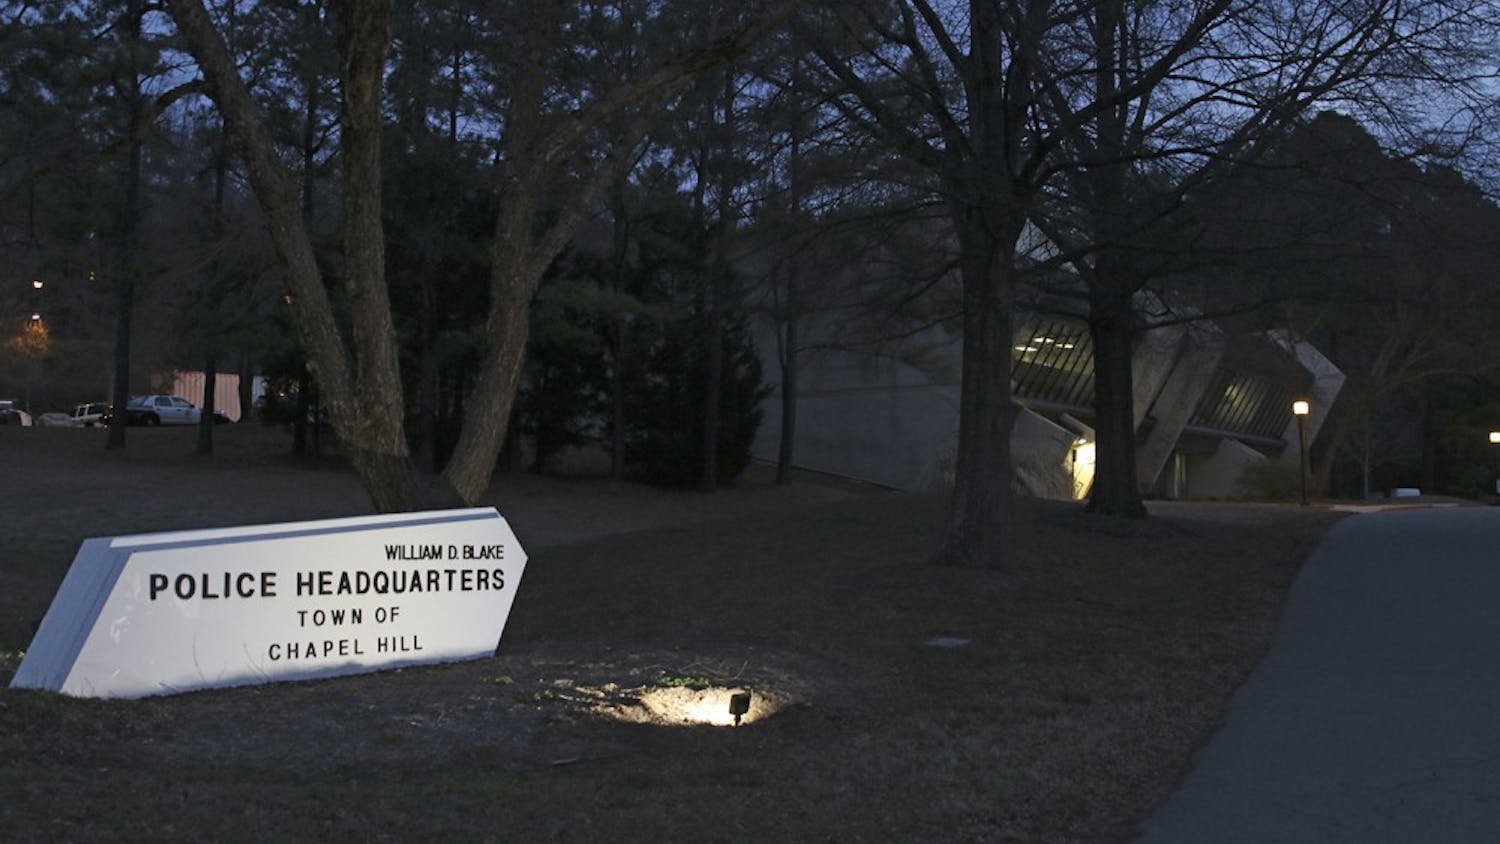 The university is leasing land to the Chapel Hill Police Department to build a new building.